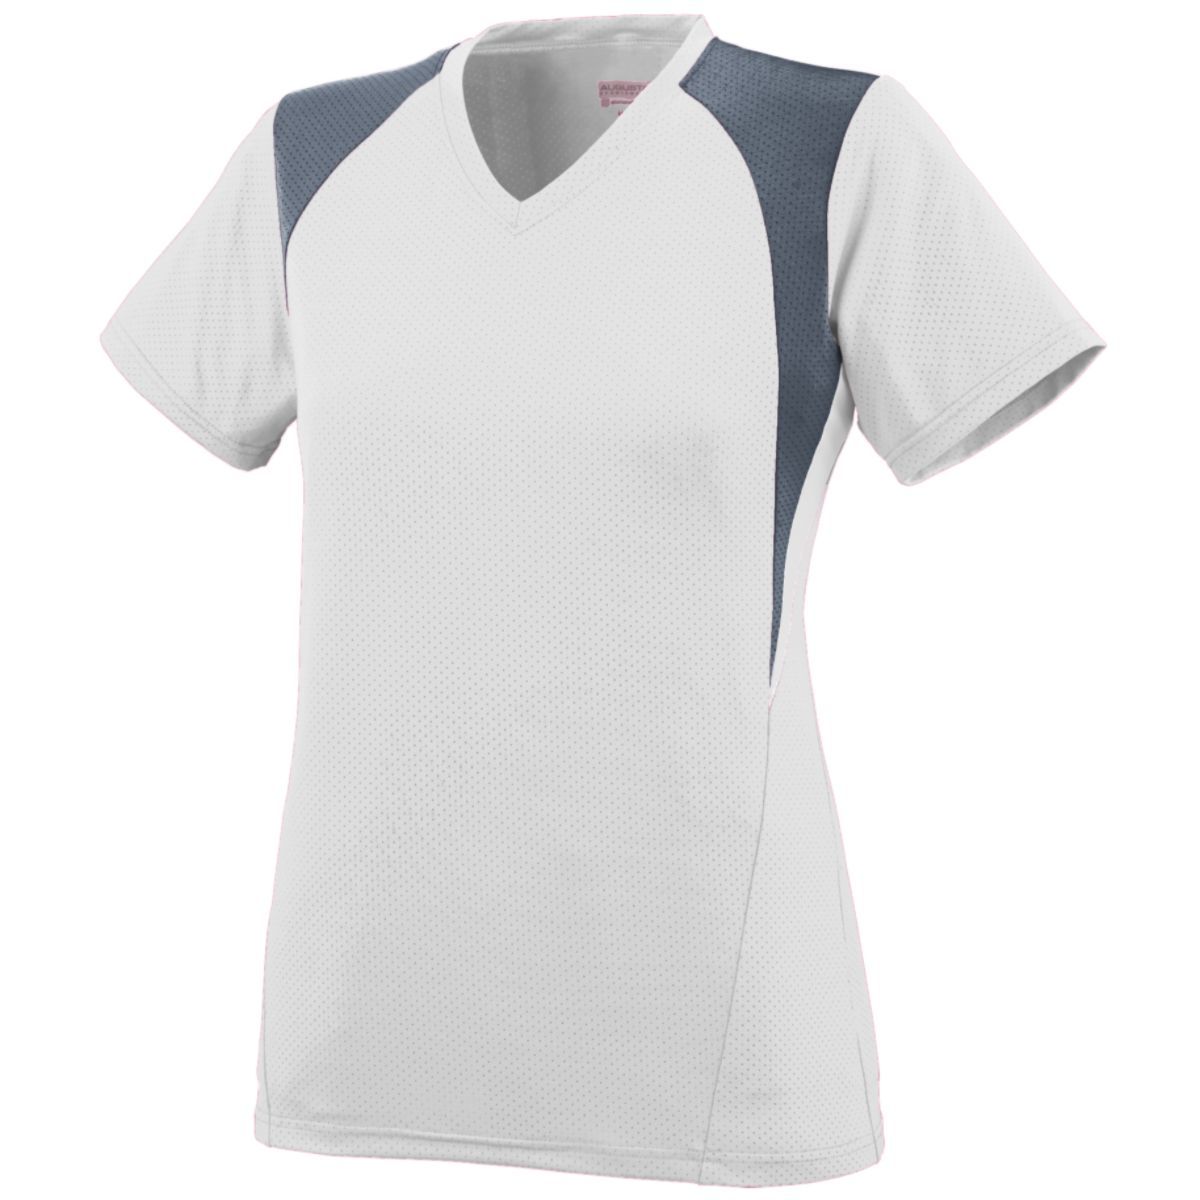 Augusta Sportswear Girls Mystic Jersey in White/Graphite/White  -Part of the Girls, Augusta-Products, Soccer, Girls-Jersey, Shirts, All-Sports-1 product lines at KanaleyCreations.com